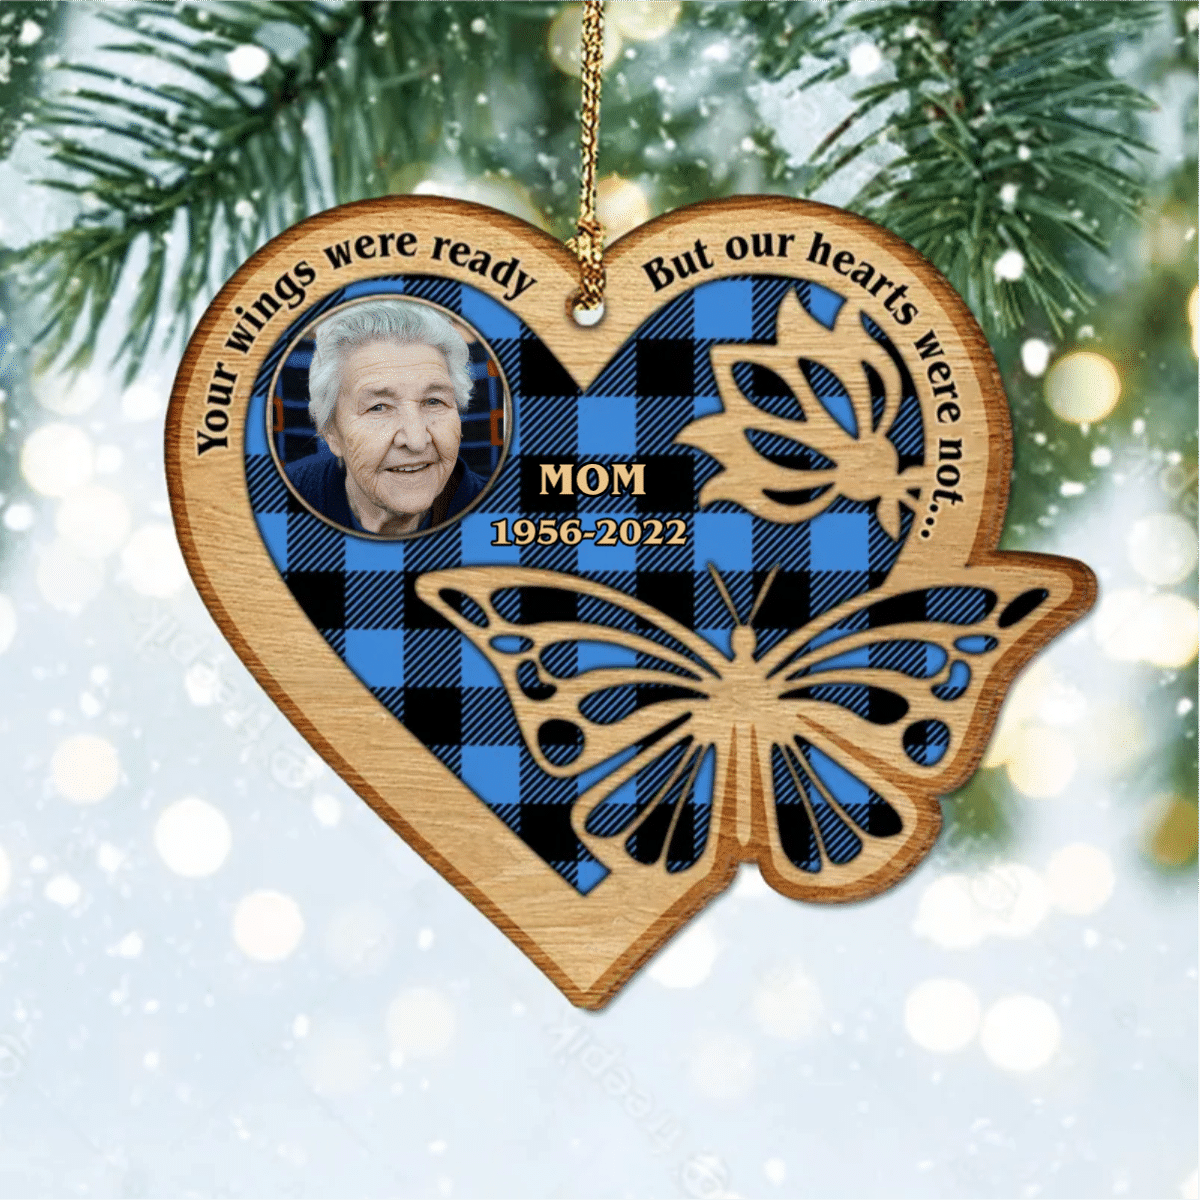 Memorial Personalized Wood Ornament/ Your Wings Were Ready But Our Hearts Were Not